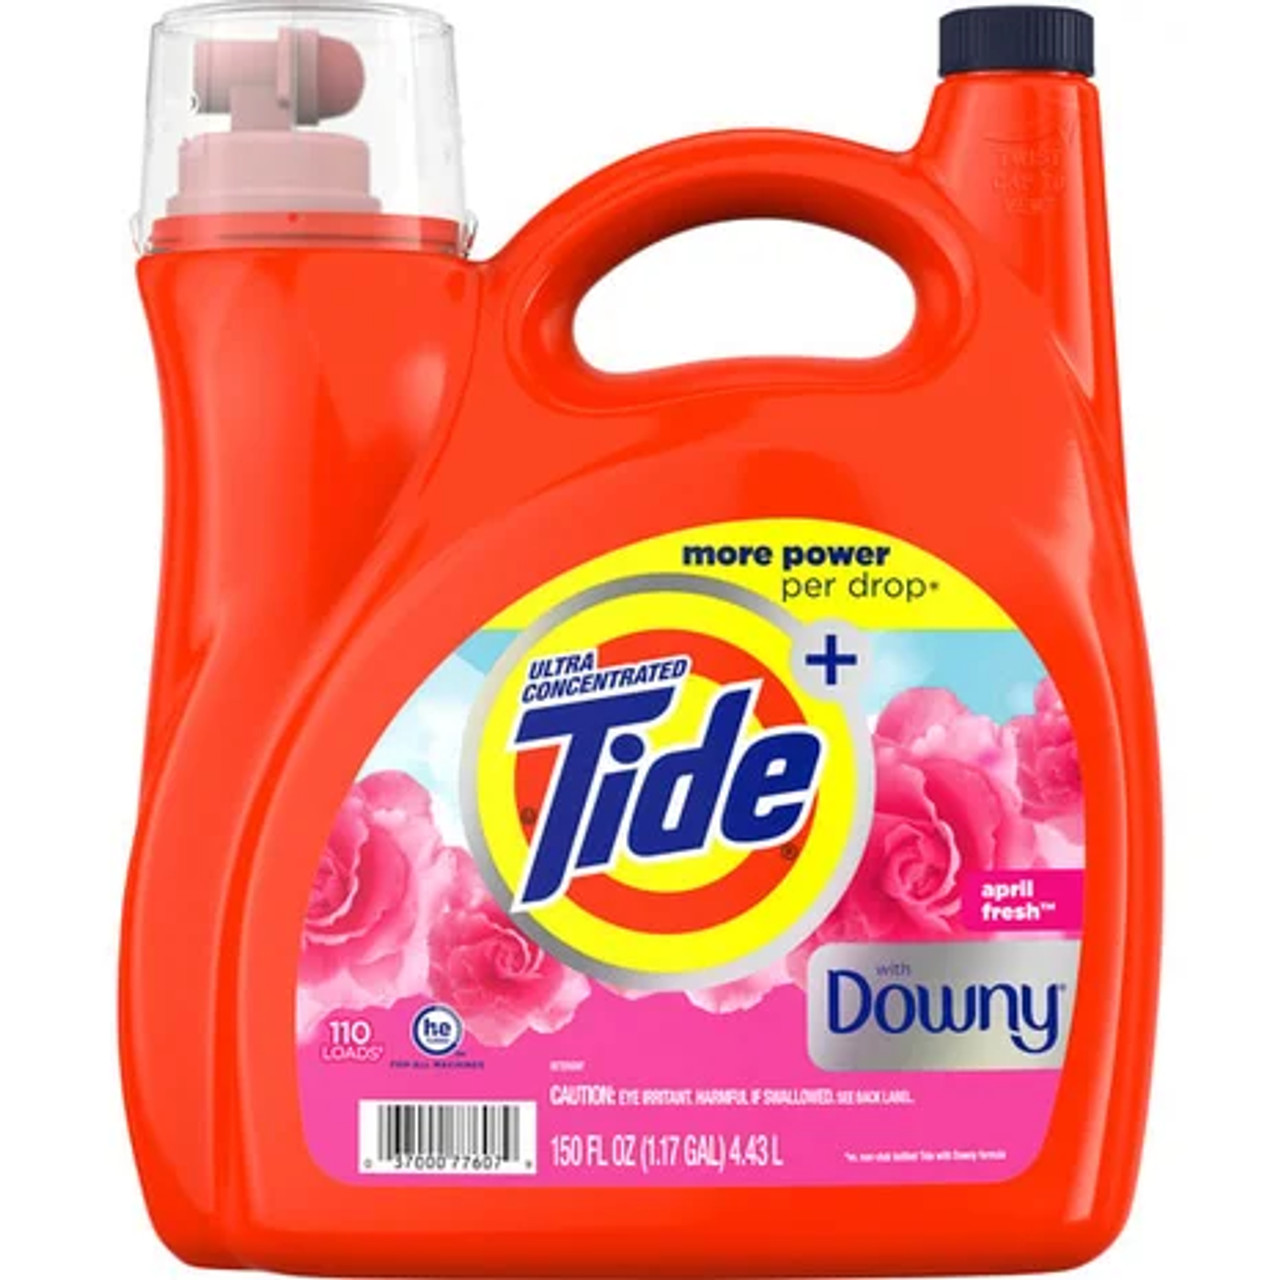 Tide HE Laundry Detergent w/Downy - April Fresh Scent (110 loads) - 150 oz.  - Fore Supply Company